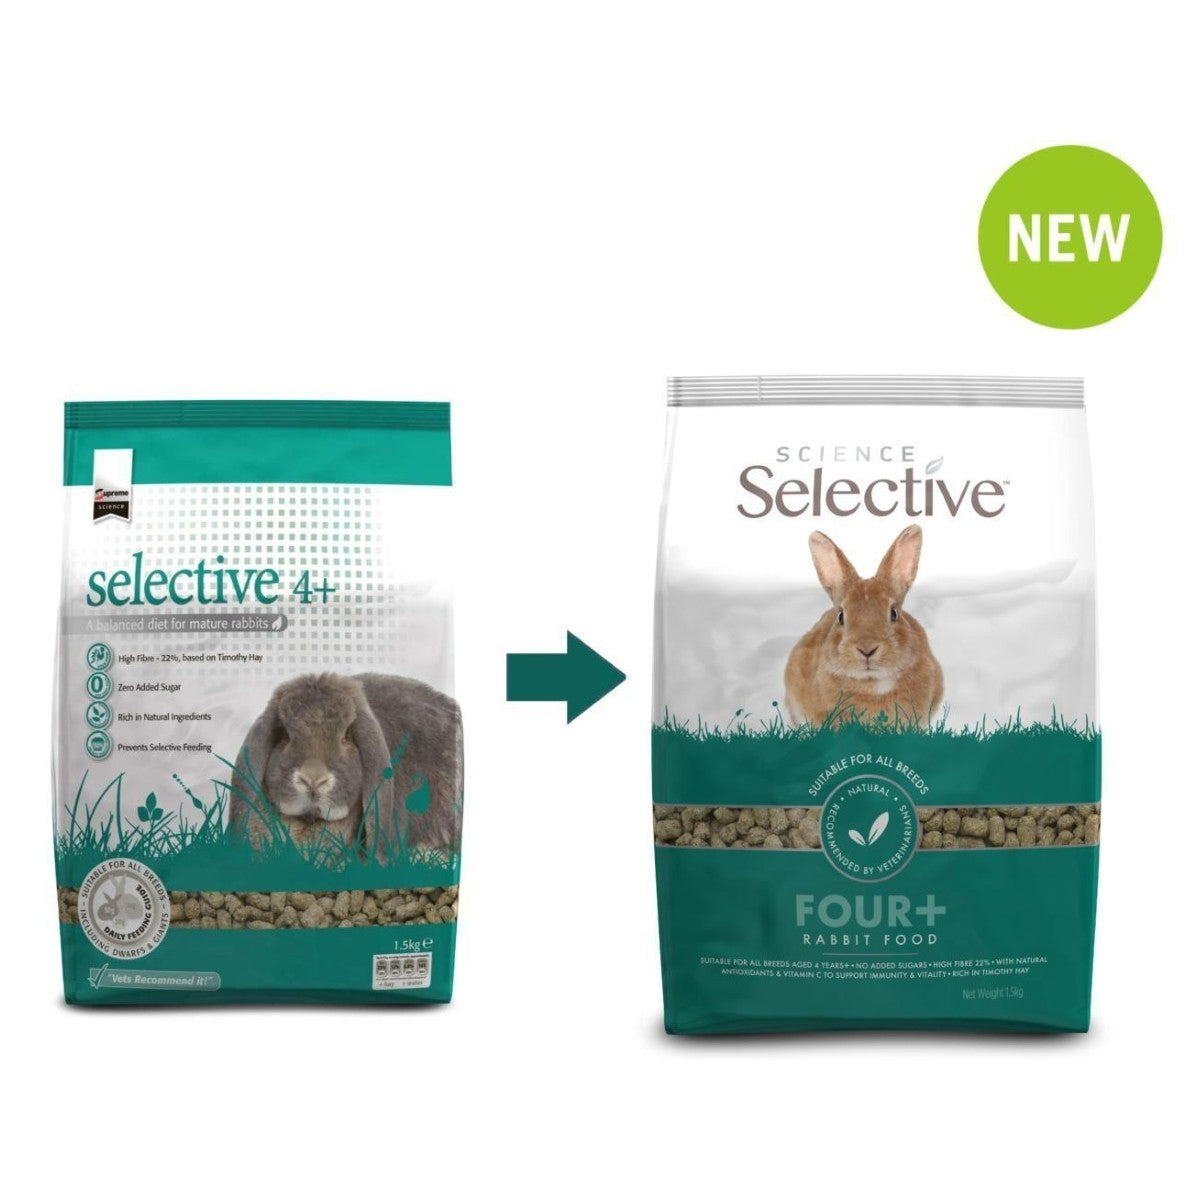 Science Selective - Four+ Rabbit Food